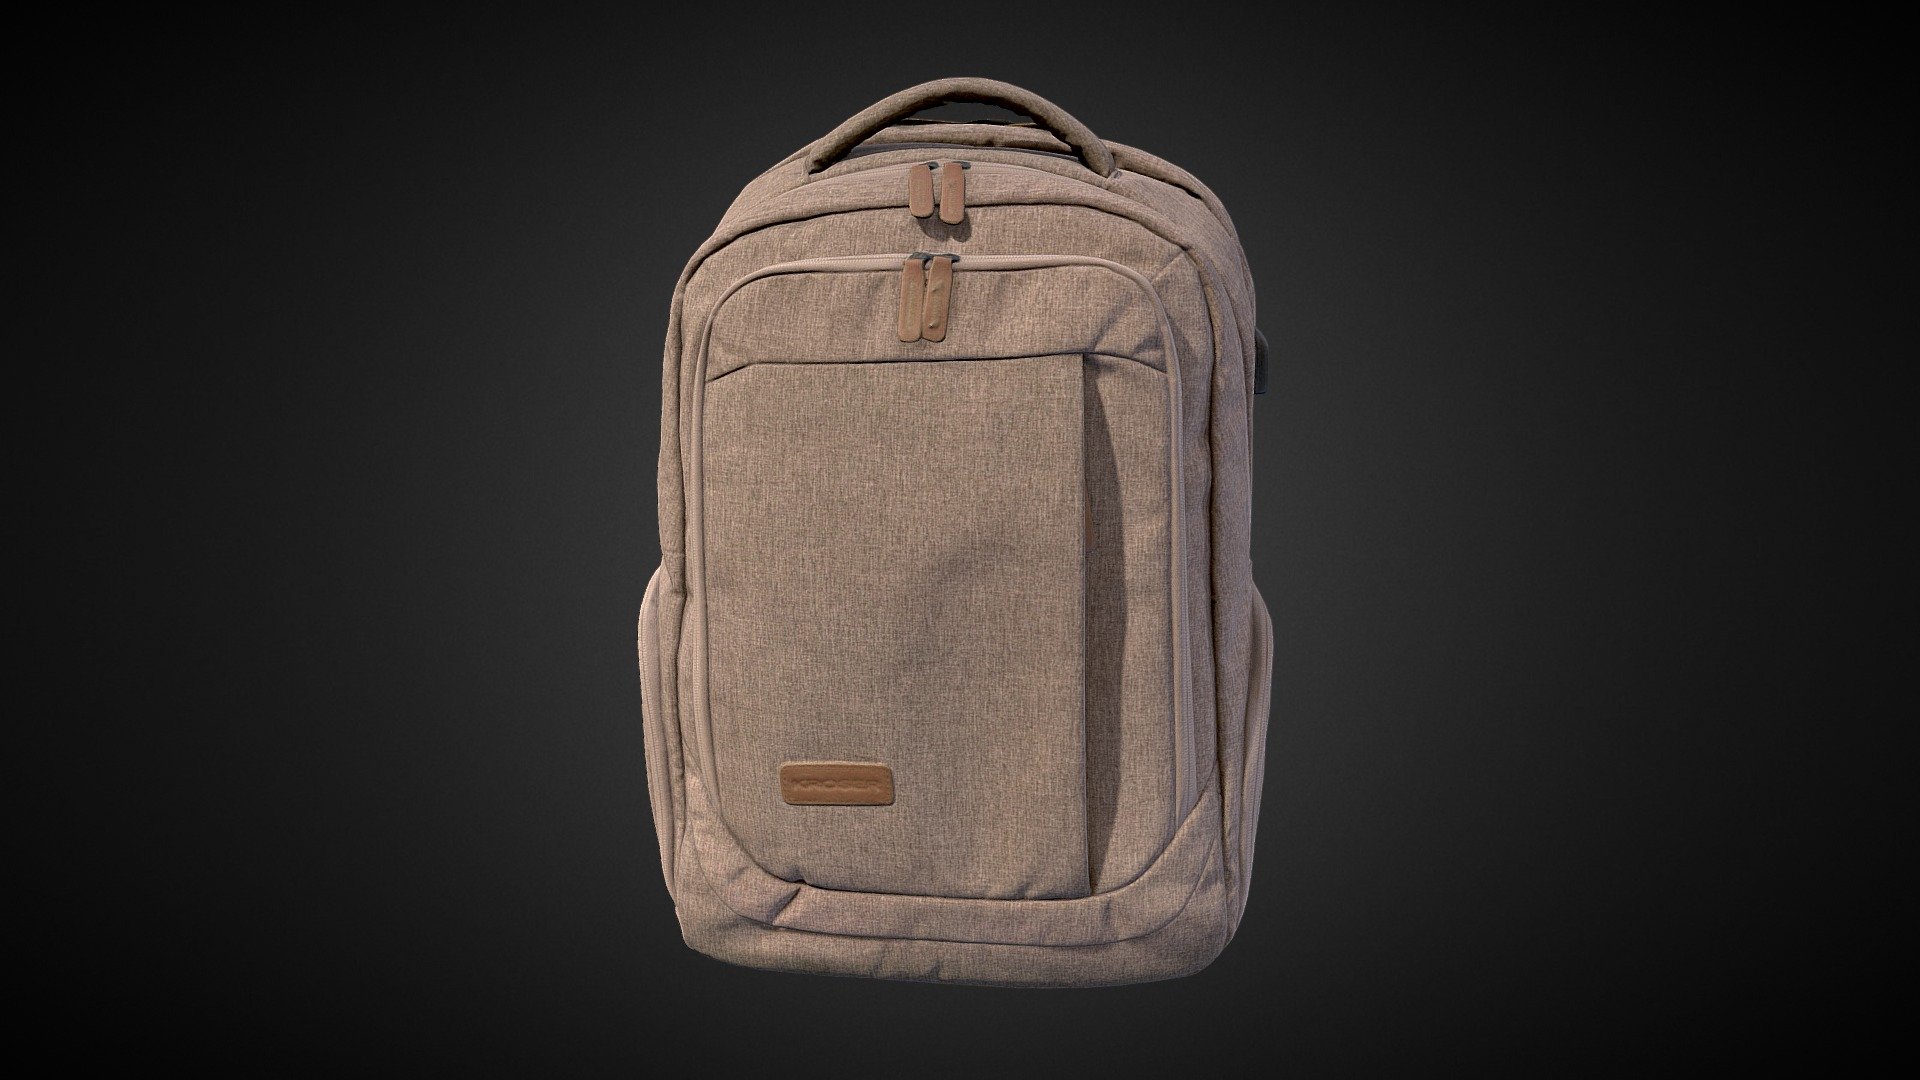 Backpack 01 SD-Fast 3D Scan Sample

This model was created using our low-priced 3D scan option. Contact us for custom object pricing! - Backpack 01 SD-Fast 3D Scan Sample - Buy Royalty Free 3D model by 3DScanX 3d model